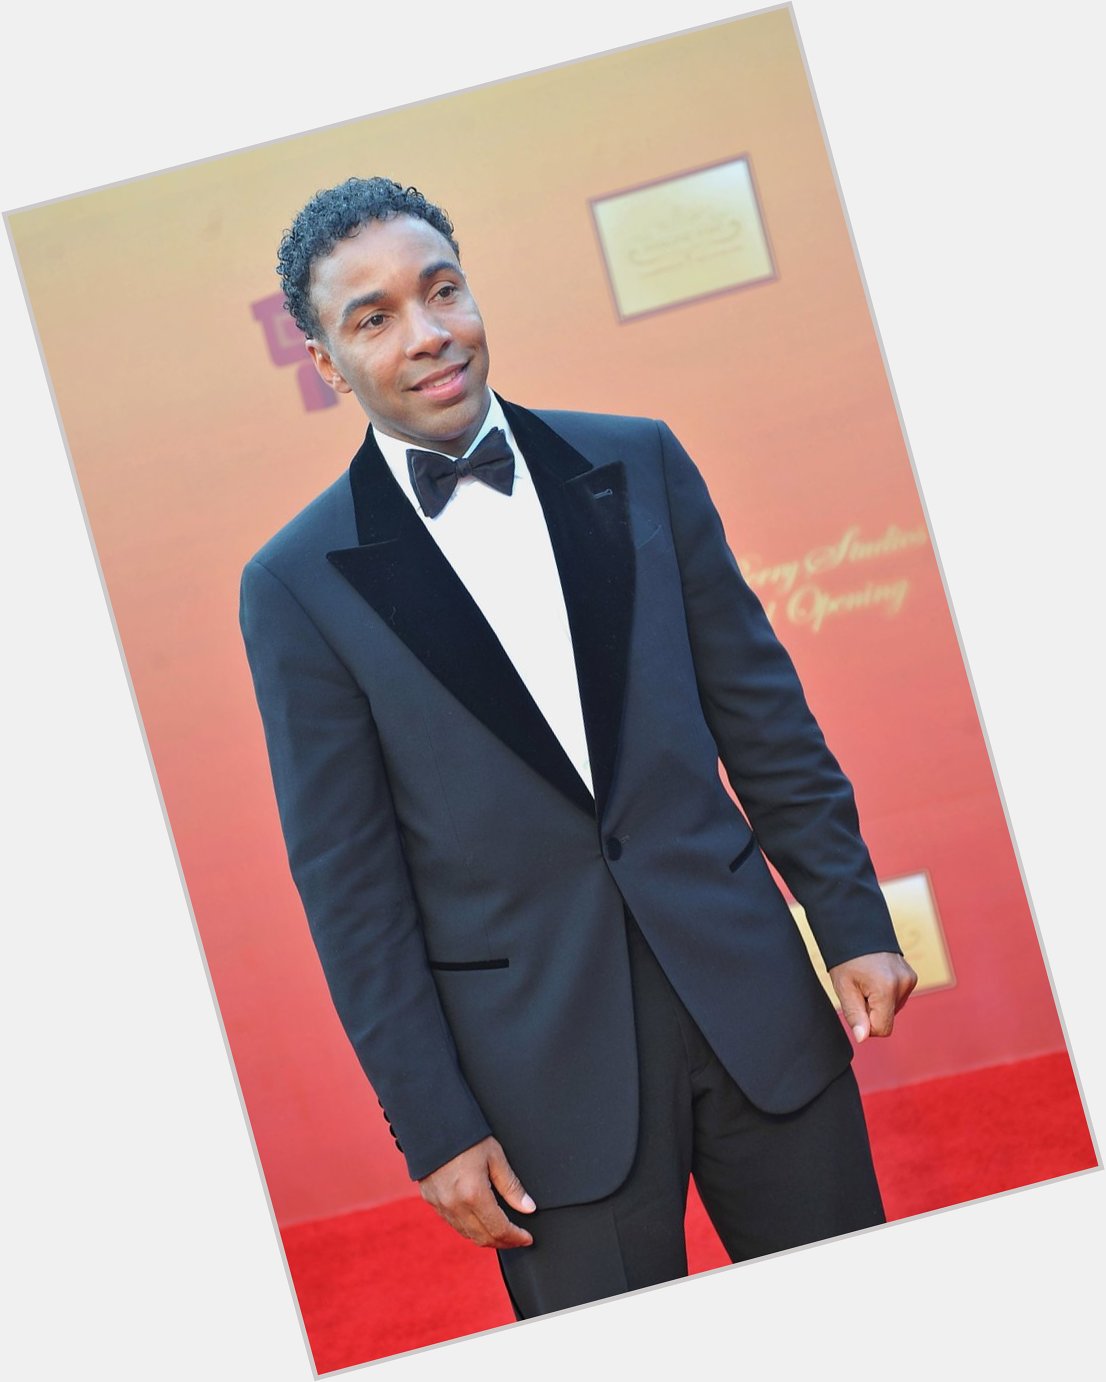 Happy Birthday Allen Payne, who turns 55 years old today  : Getty Images / 